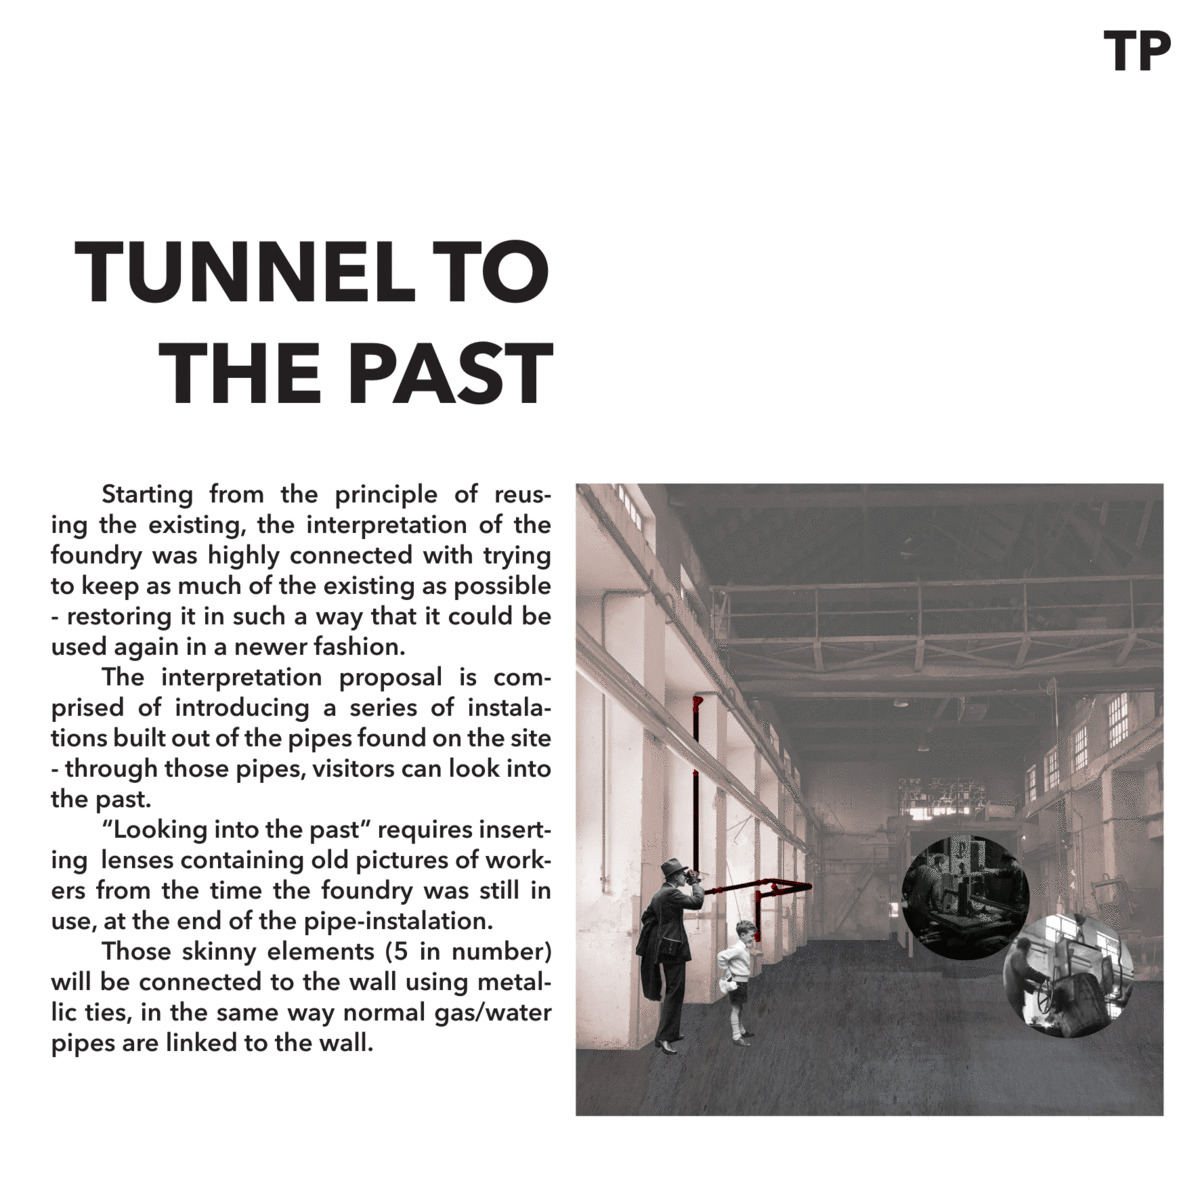 Tunnel to the past